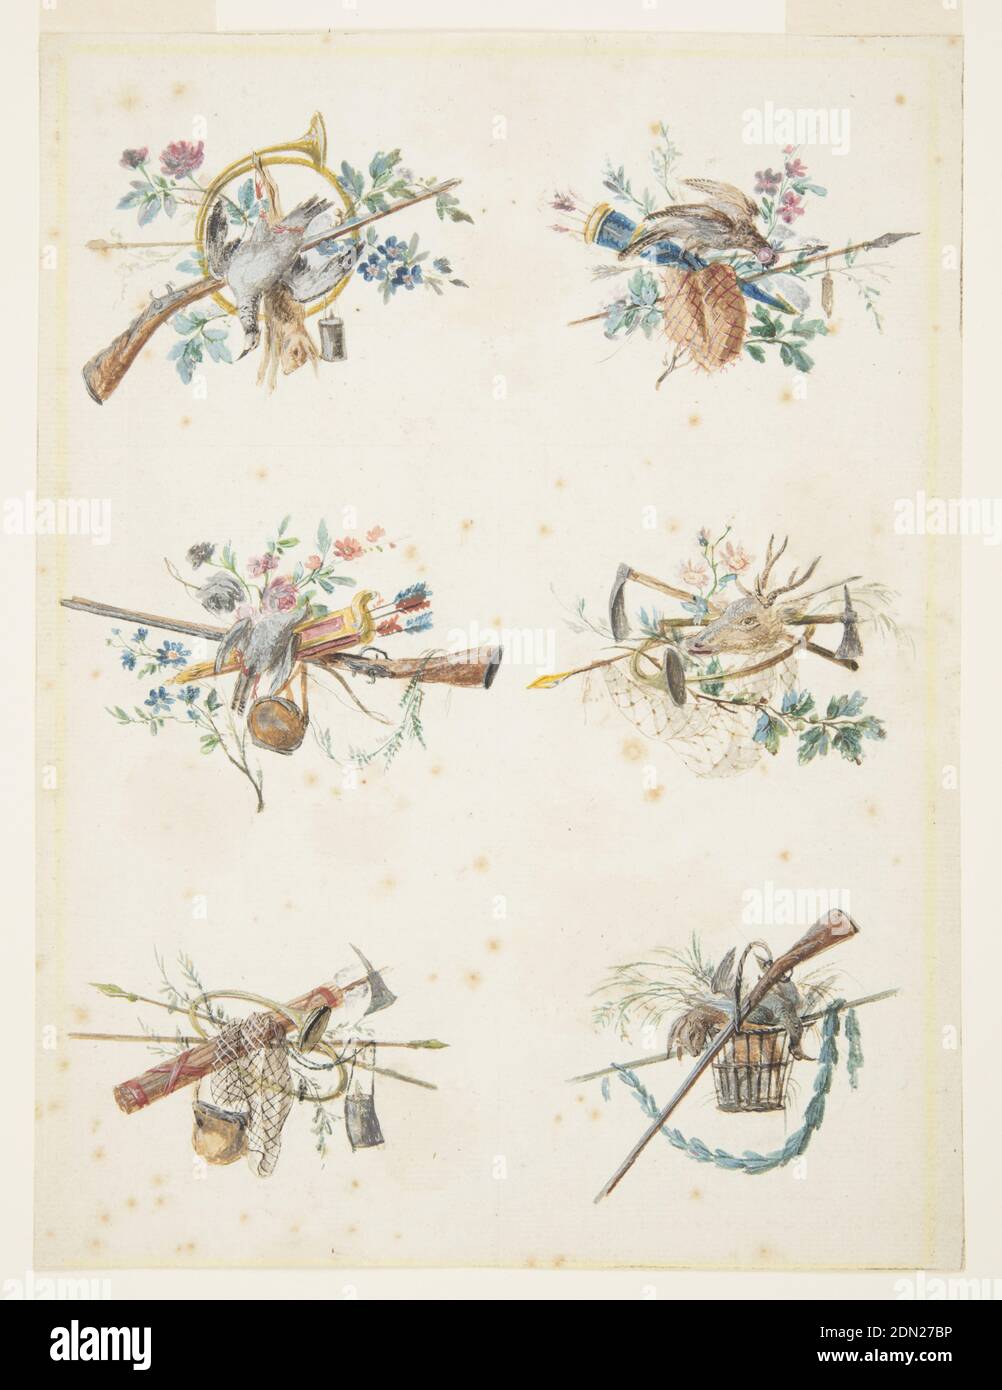 Designs for Six Trophies Composed of Hunting Attributes, Pierre Ranson, French, 1736–1786, Brush and gouache, white heightening, pen and black ink, graphite on cream paper, Six designs for hunting trophies. Upper left: French horn, rifle, dead pheasant and rabbit, along with wild flowers; upper right: arrows, blue quiver, a live pheasant, and wild flowers; center left: pink and gold quiver with arrows, a rifle, and hanging canteen, and a bird, surrounded by wild flowers; center right: stag’s head, pickaxes, an arrow, a French horn, a net, and some wild flowers; lower left: pickaxe and fasces Stock Photo